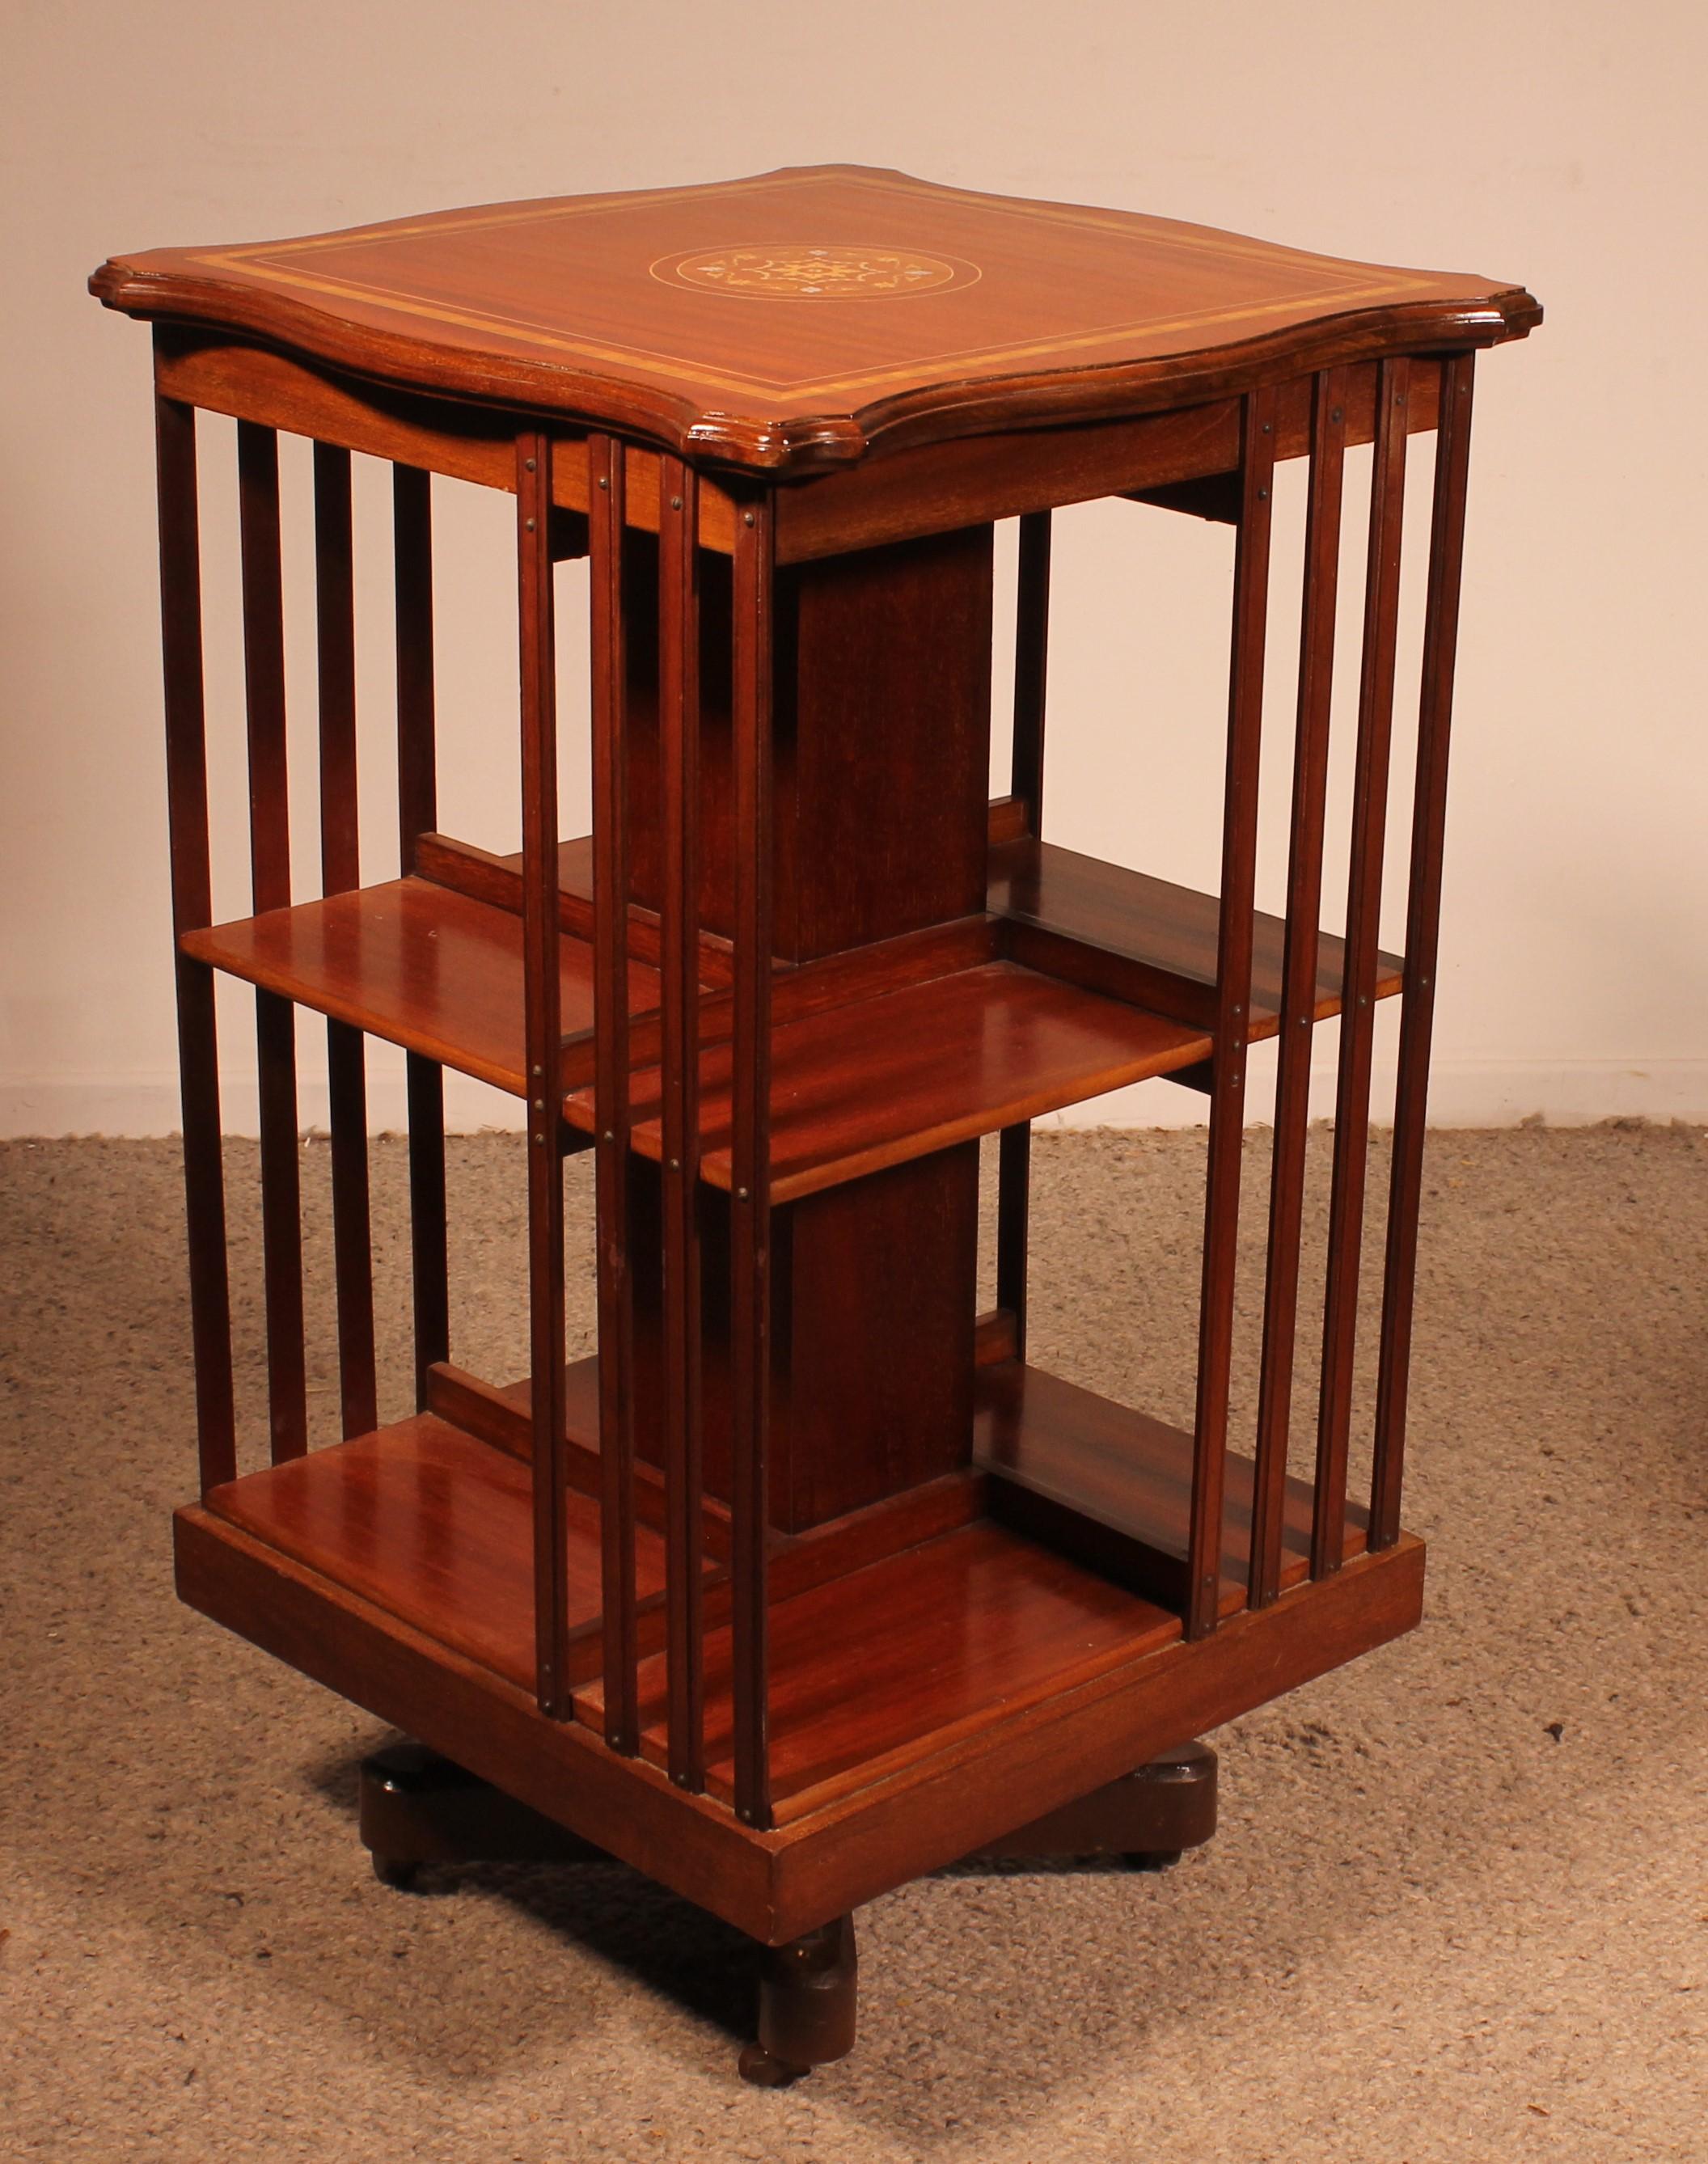 Elegant revolving bookcase in mahogany from the end of the 19th century from England
Very beautiful mahogany bookcase which has a very beautiful top with a wooden maruqeterie and inlays
Very beautiful patina and in very good condition
It rests on